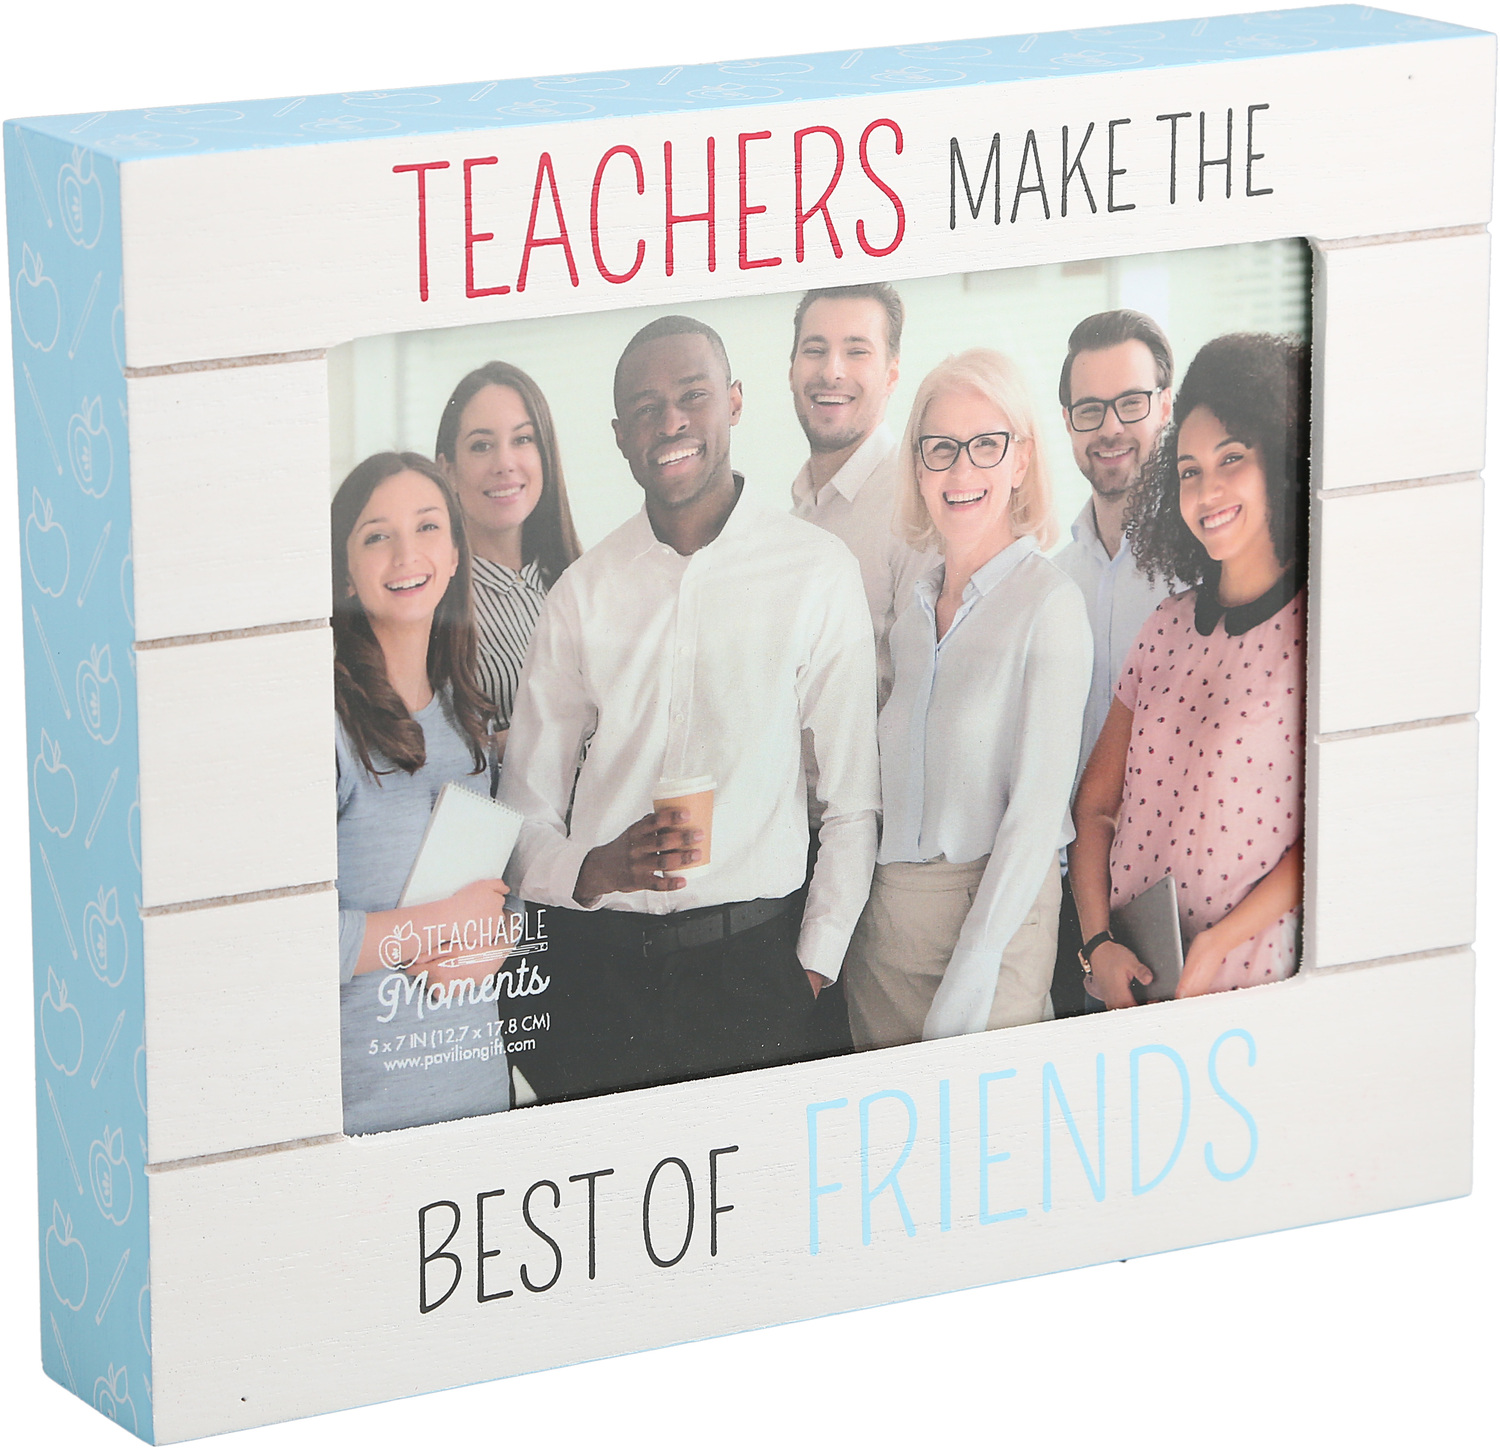 Best of Friends by Teachable Moments - Best of Friends - 9" x 7.25" Frame (Holds 7" x 5" Photo)